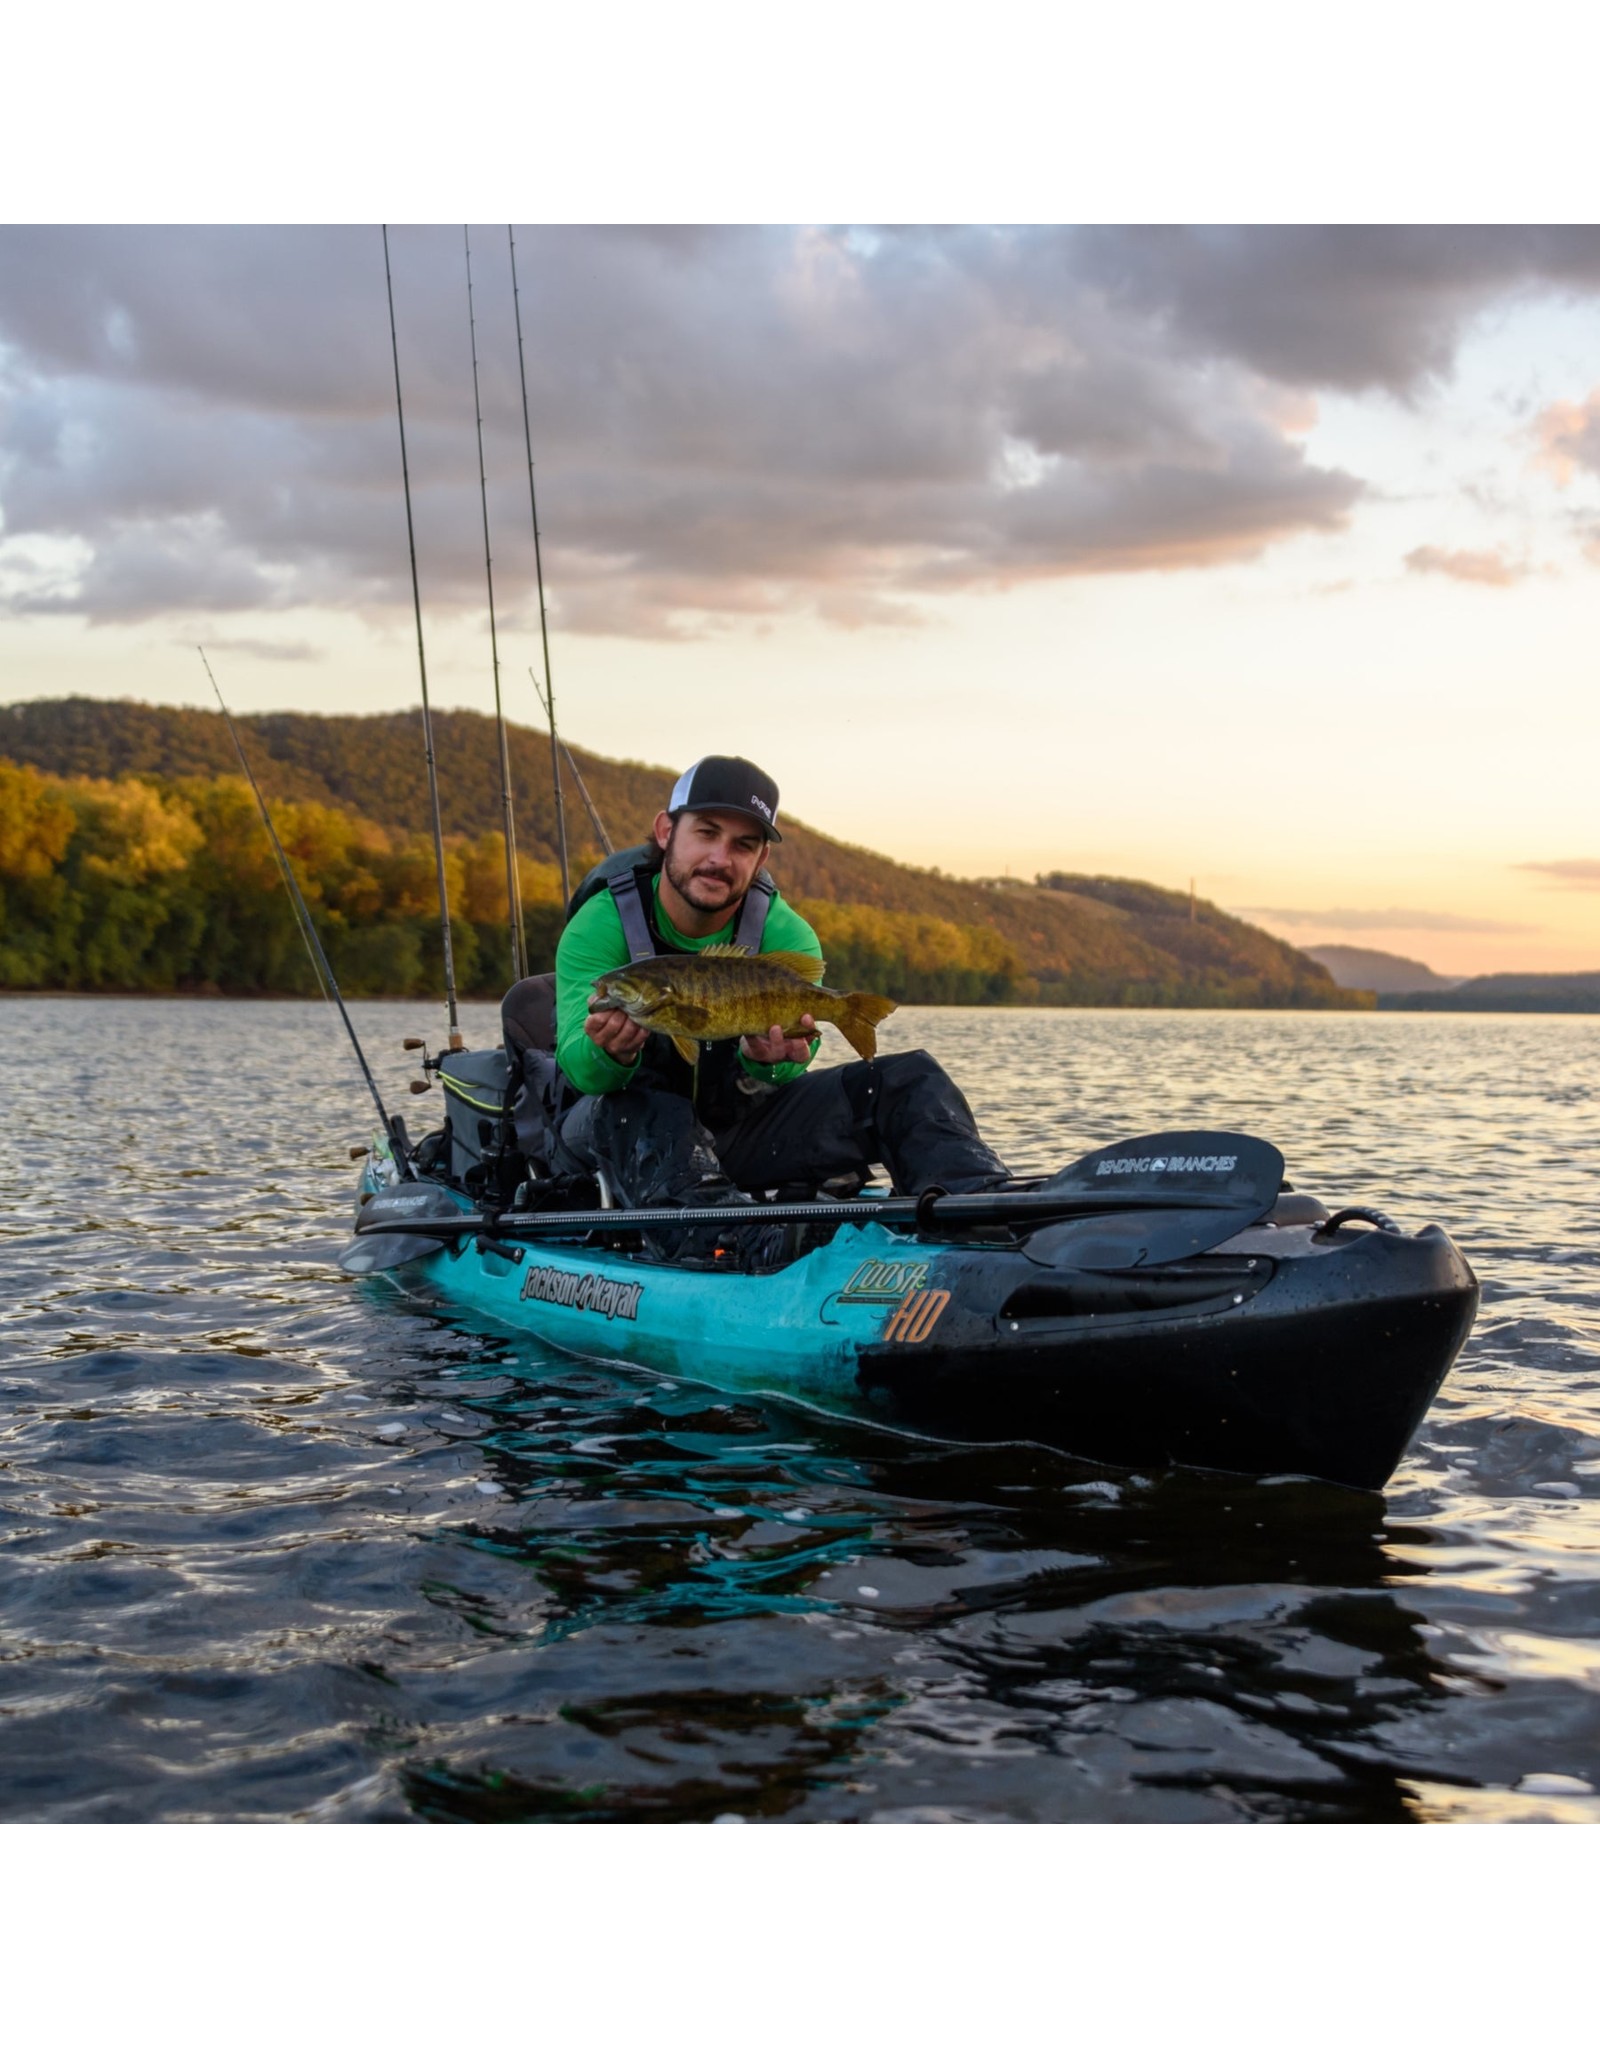 Bending Branches The best overall value in kayak fishing paddles, the Ace combines the weight savings of a carbon shaft with the most durable blades available.  Oversized carbon-reinforced nylon blades provide more power and efficiency for loaded down fishing kayaks 100%